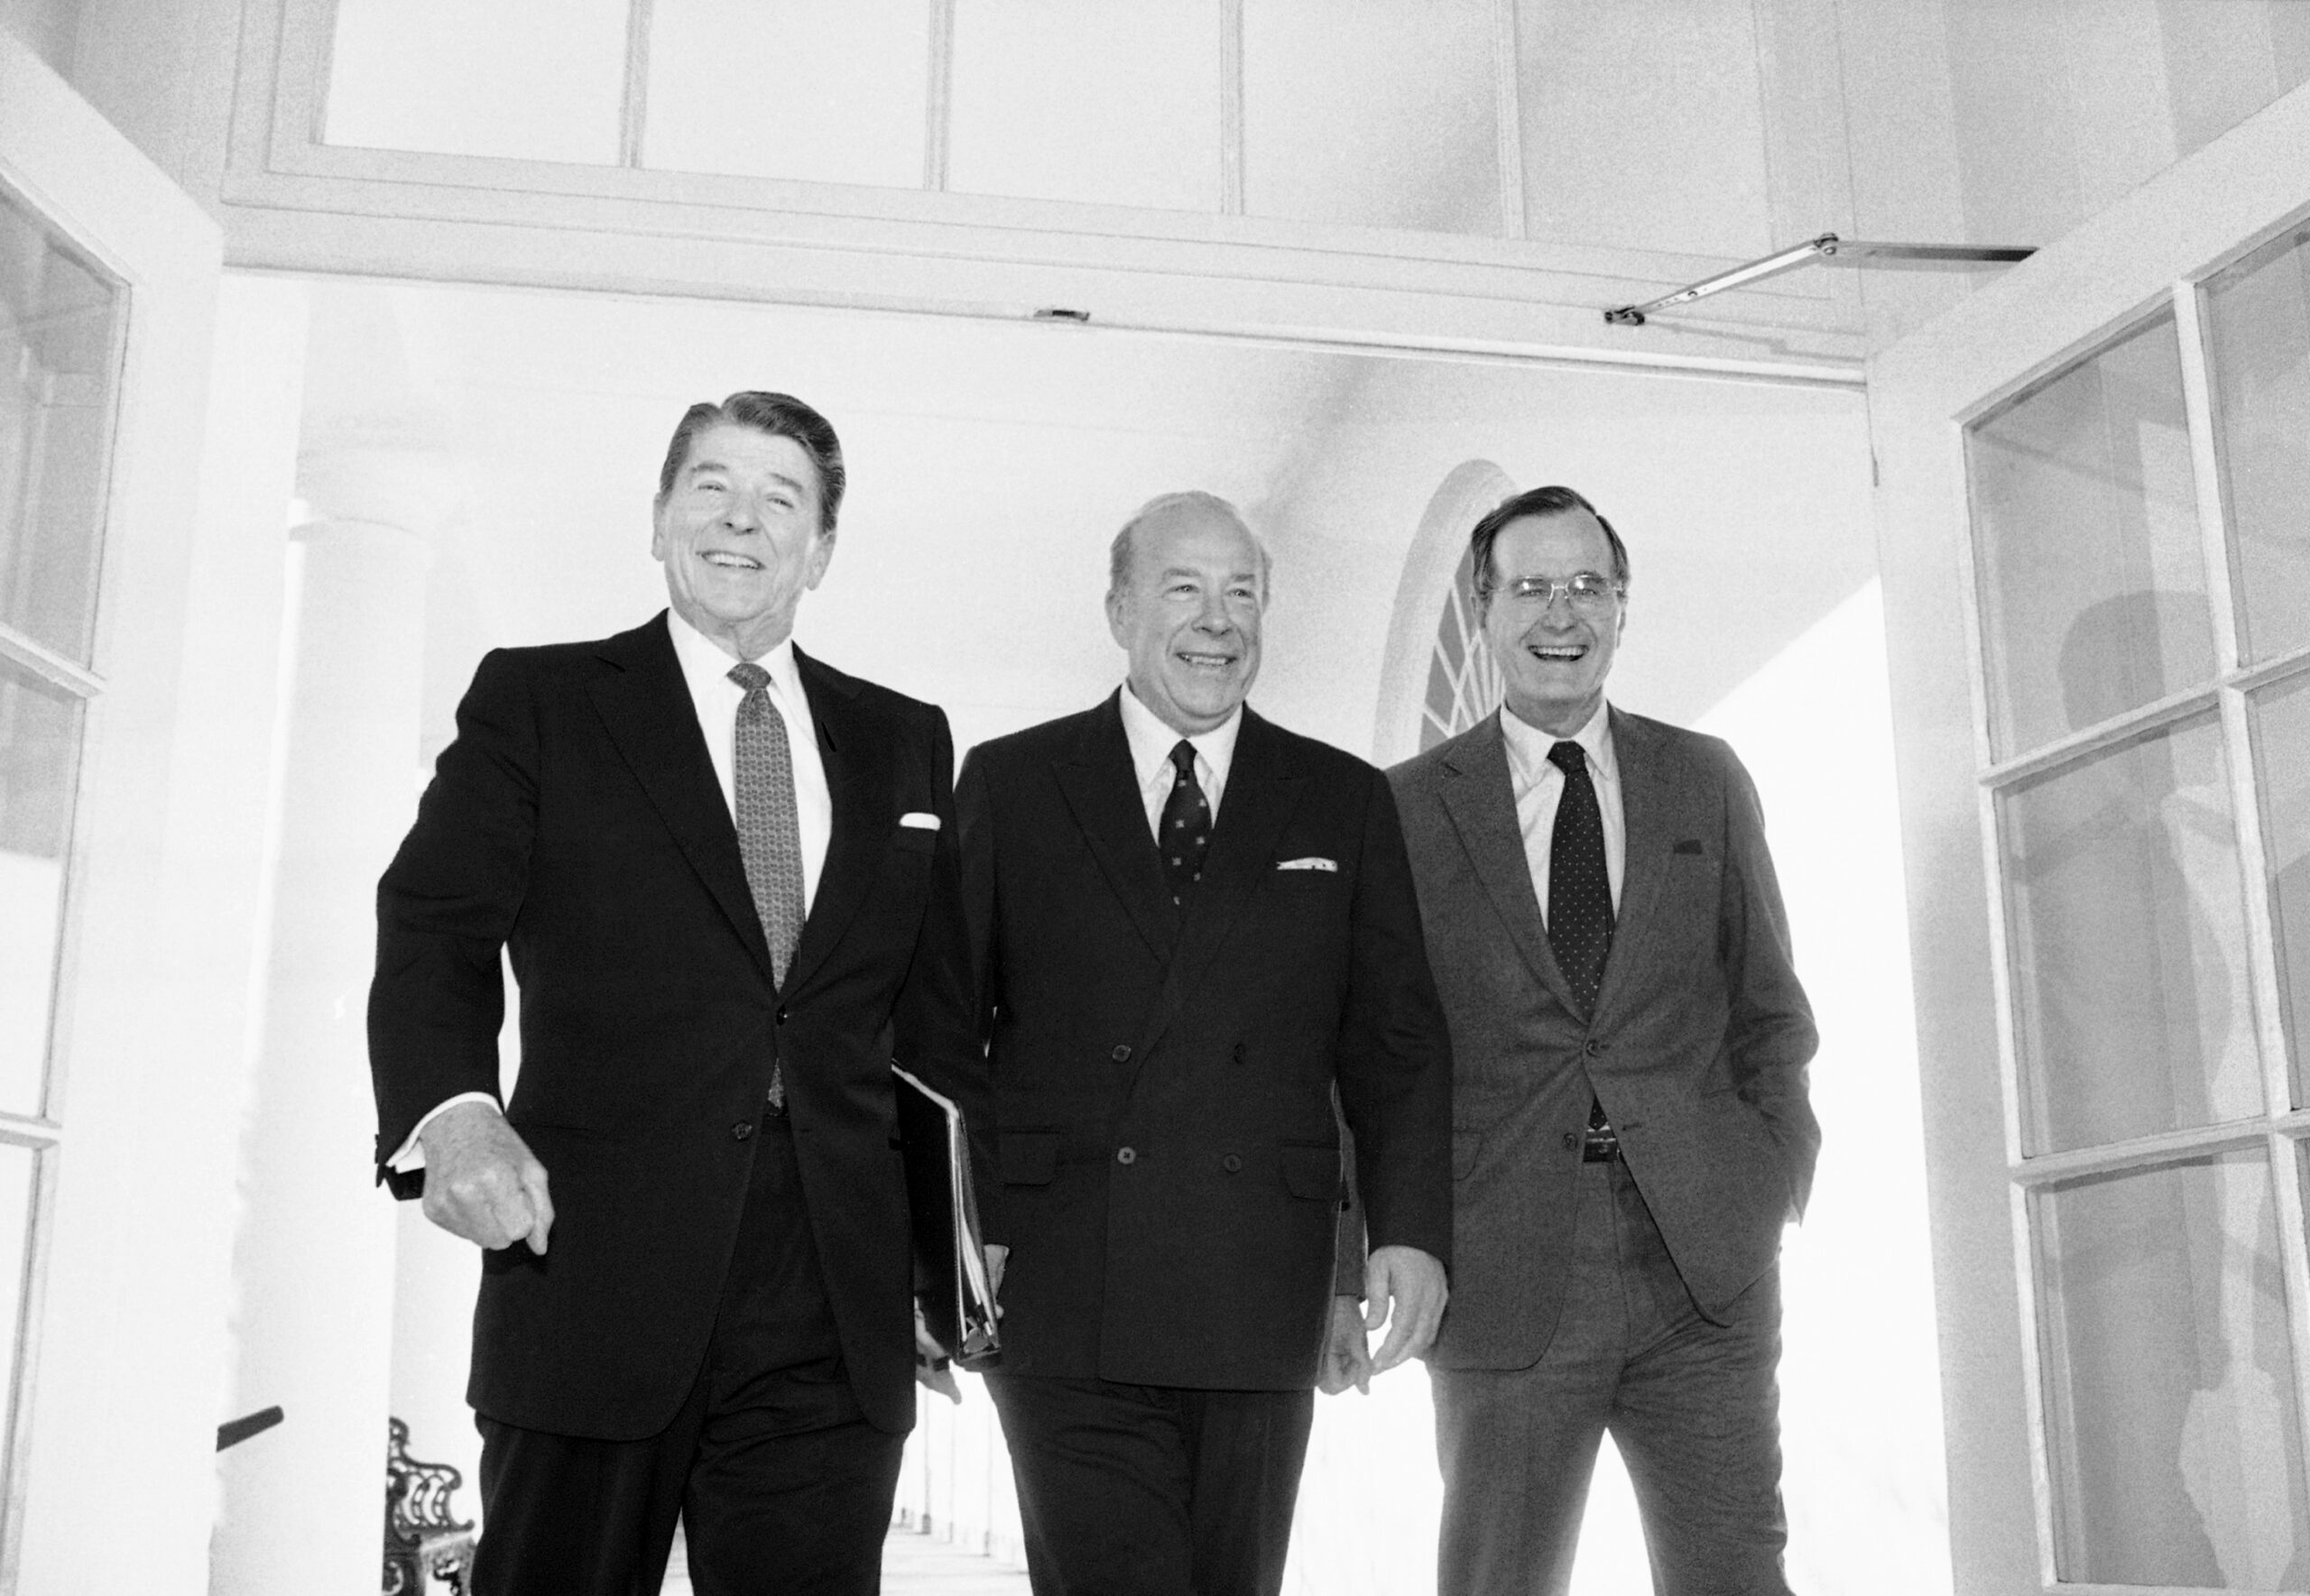 FILE - In this Jan. 9, 1985 file photo, Secretary of State George Shultz, center, walks with President Ronald Reagan and Vice President George Bush upon his arrival at the White House in Washington, after two days of arms talks with the Soviet Union in Geneva. Shultz, former President Reagan's longtime secretary of state, who spent most of the 1980s trying to improve relations with the Soviet Union and forging a course for peace in the Middle East, died Saturday, Feb. 6, 2021. He was 100. (AP Photo/Barry Thumma, File)